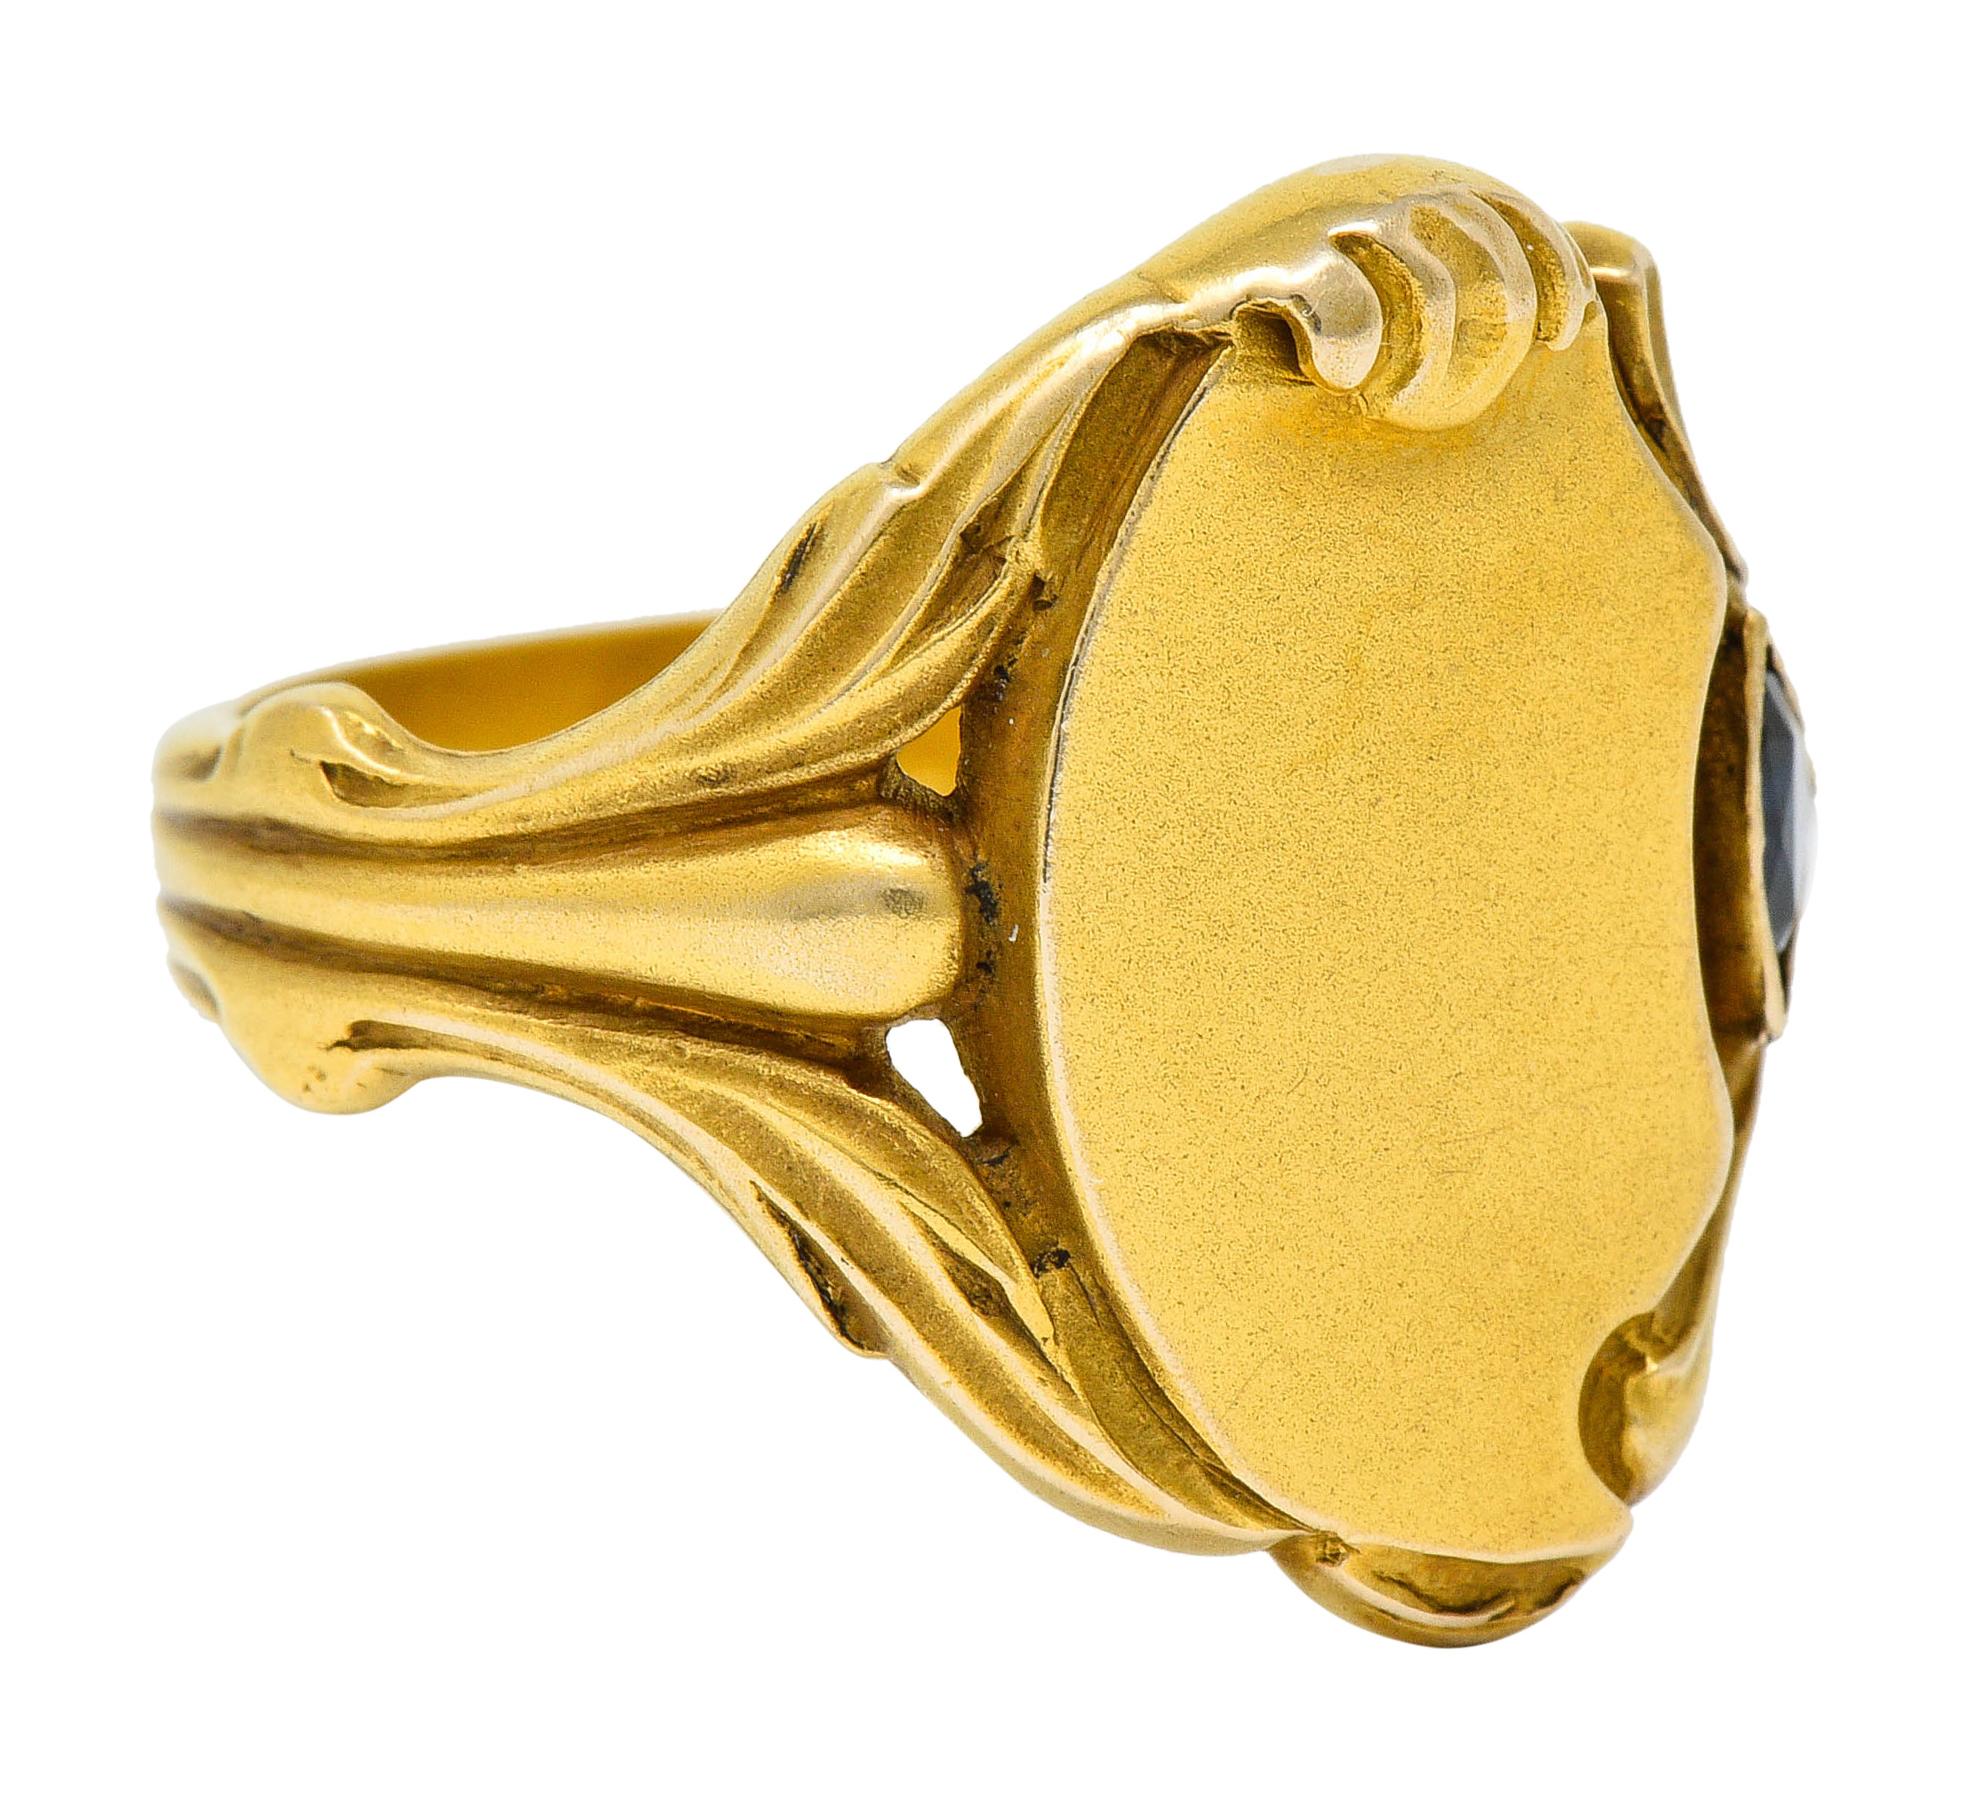 Signet style ring centering a half moon shaped and matte gold surface

Flanked by deeply ridged and whiplashed shoulders, one accented by a trillion cut sapphire

Bezel set with medium-dark royal blue color while weighing approximately 0.25